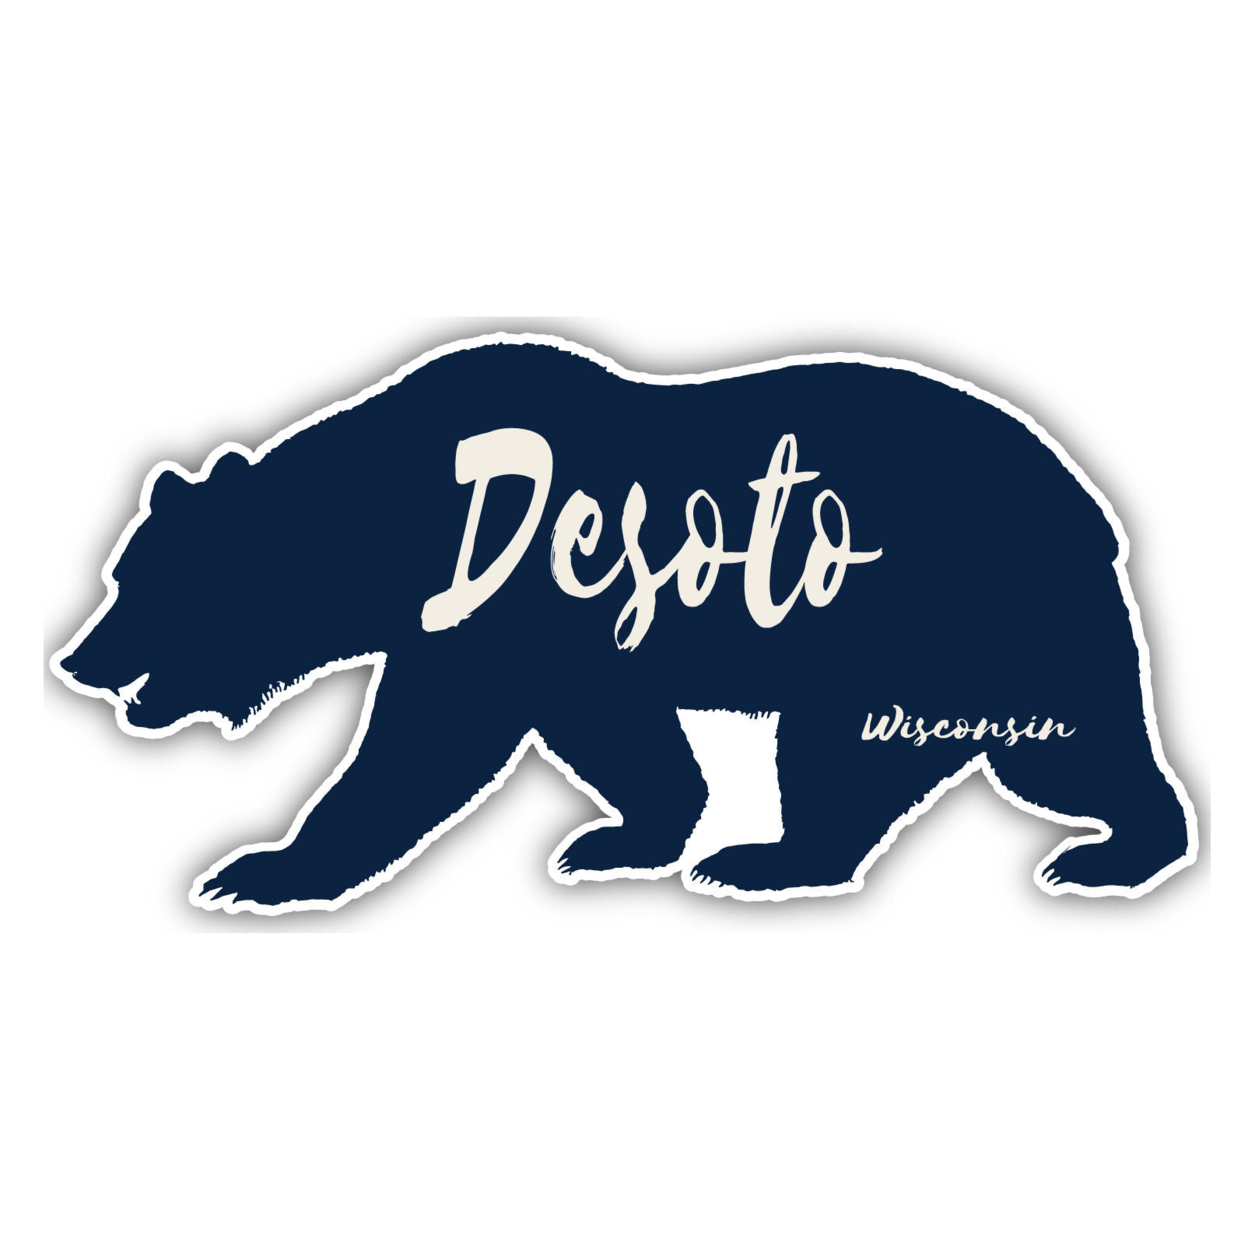 DeSoto Wisconsin Souvenir Decorative Stickers (Choose Theme And Size) - 4-Pack, 2-Inch, Bear